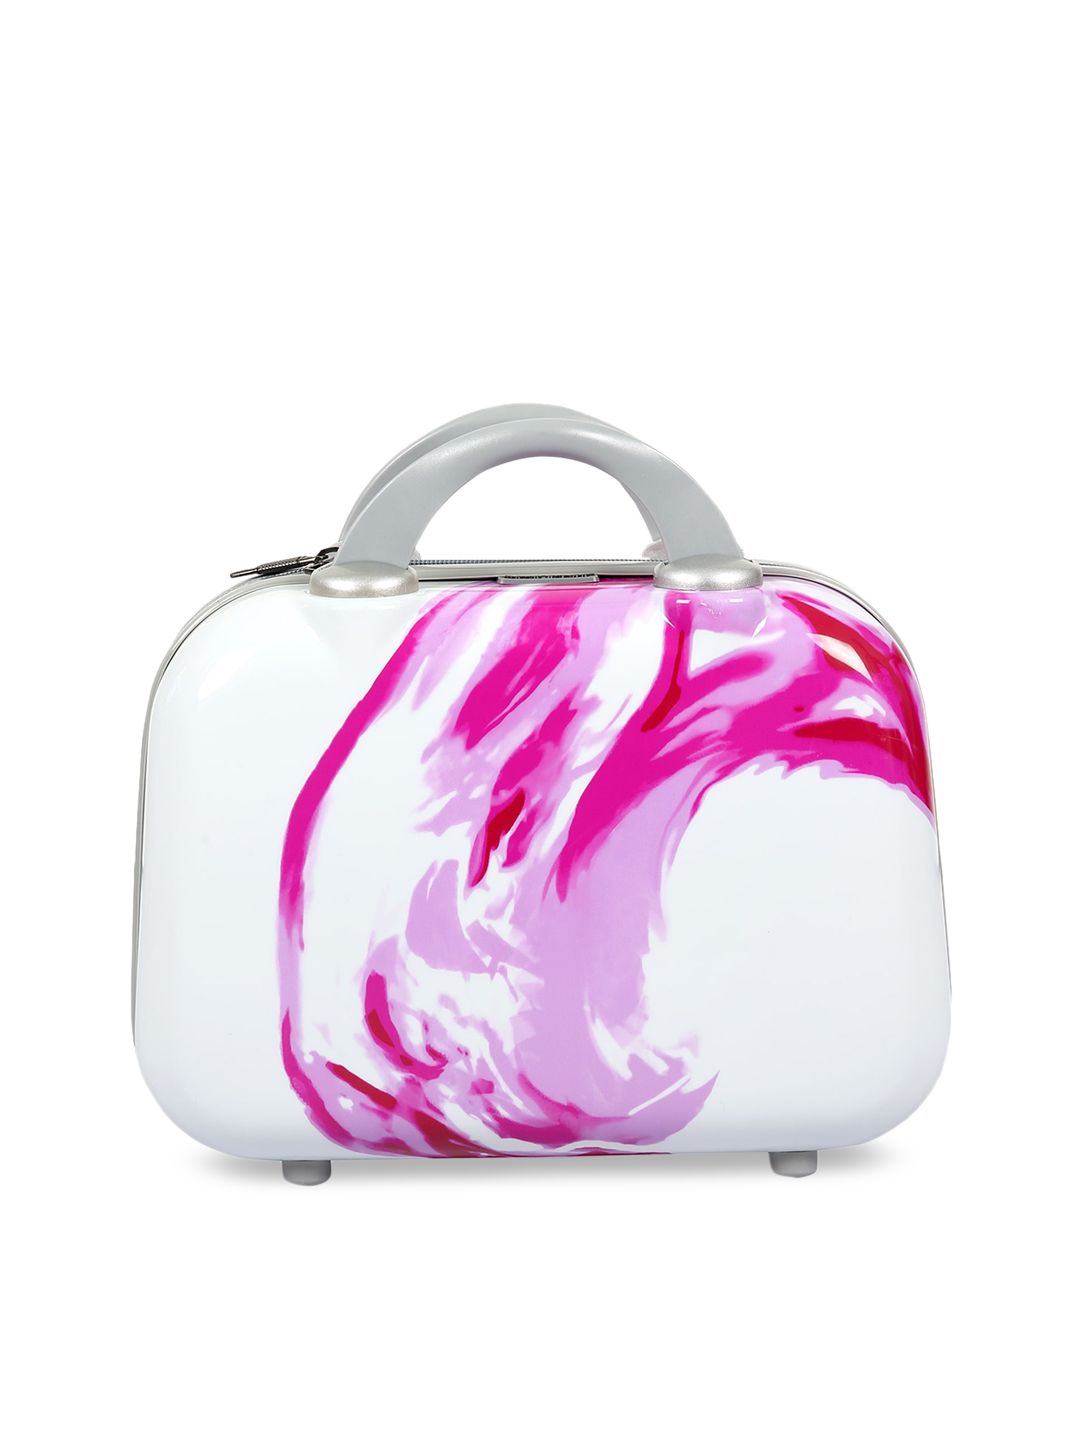 Polo Class Pink Printed Travel Vanity Bag Price in India